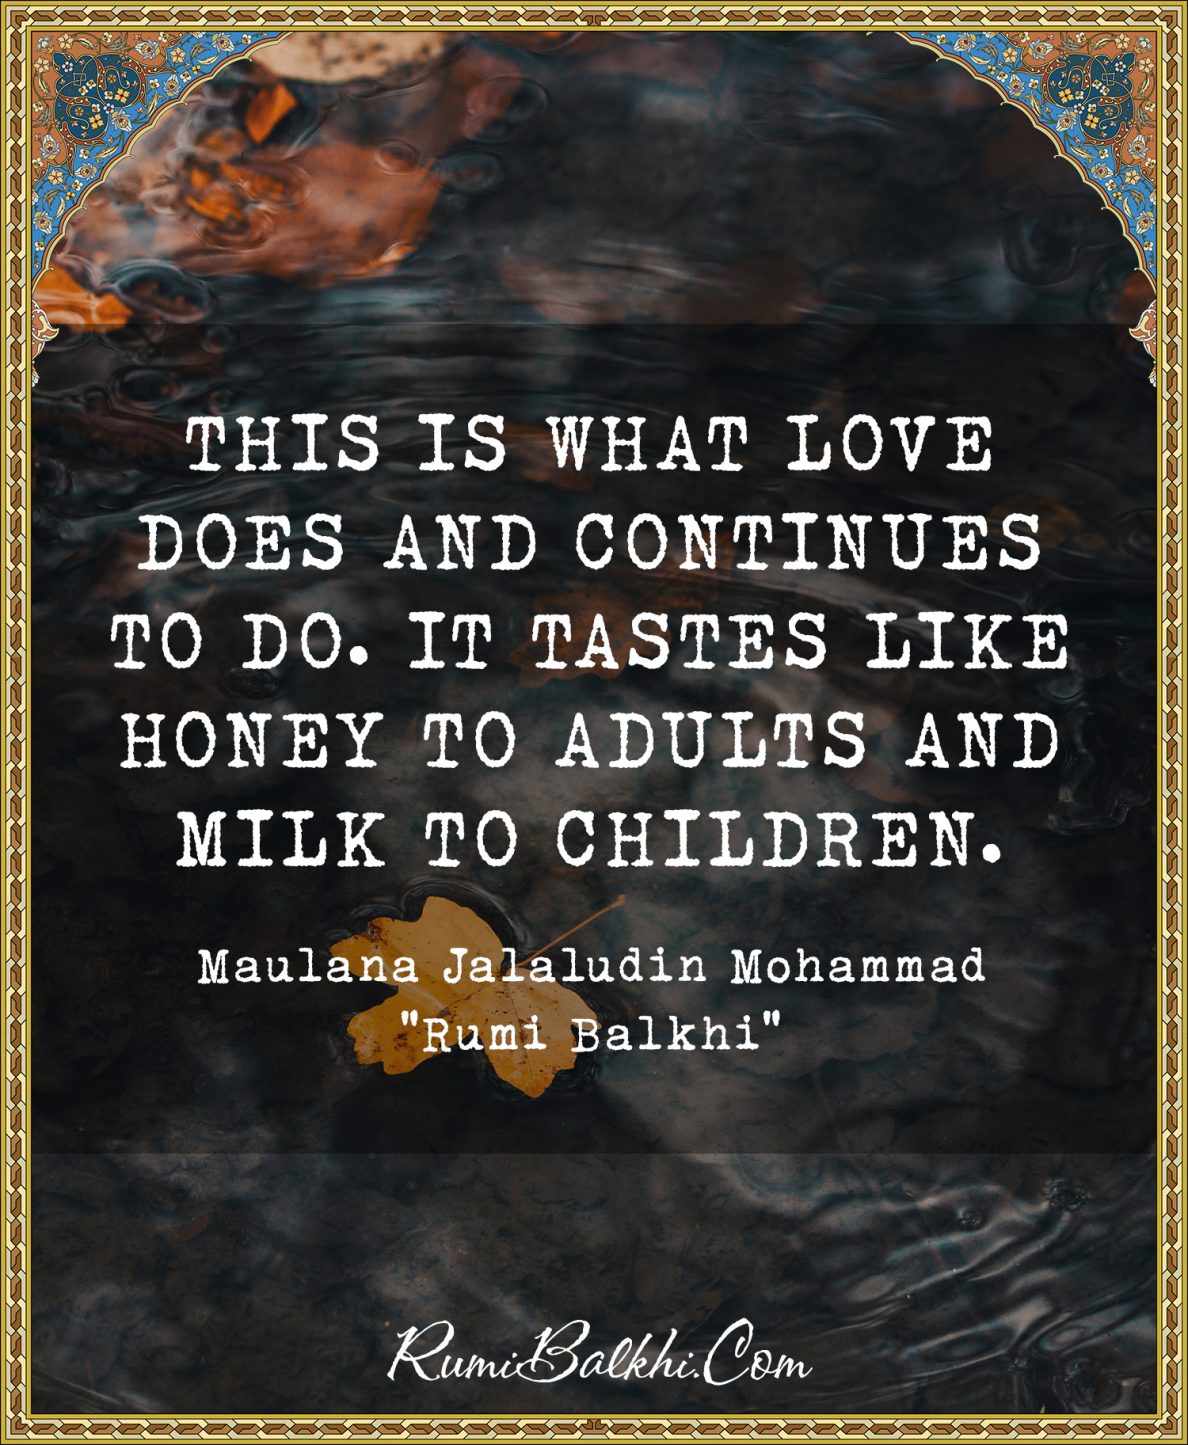 This is what love does and continues to do. It tastes like honey to adults and milk to children